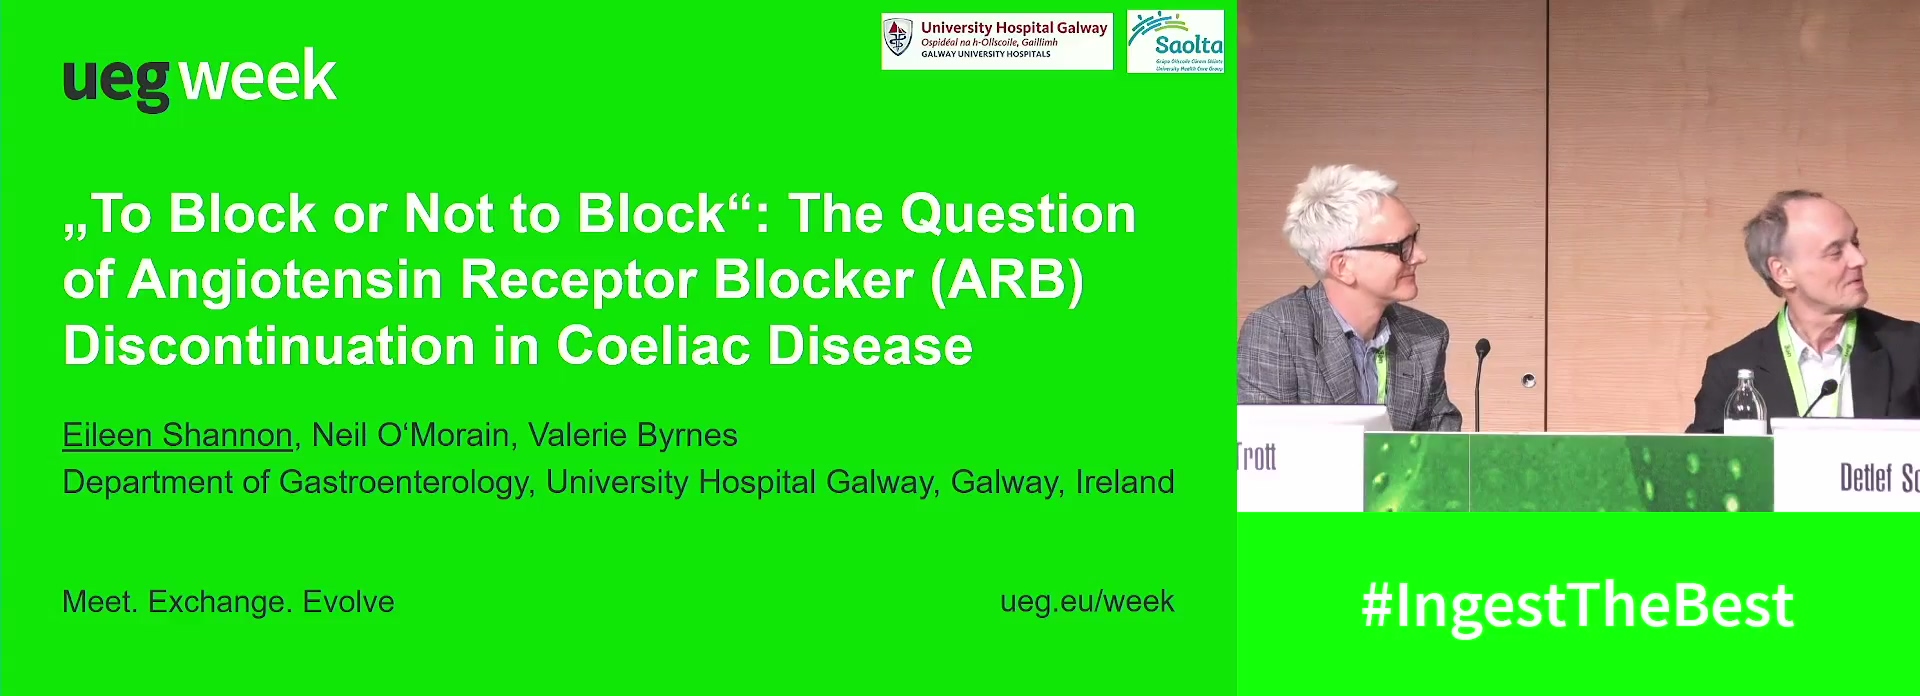 'TO BLOCK' OR 'NOT TO BLOCK': THE QUESTION OF ANGIOTENSIN RECEPTOR BLOCKER (ARBS) DISCONTINUATION IN COELIAC DISEASE